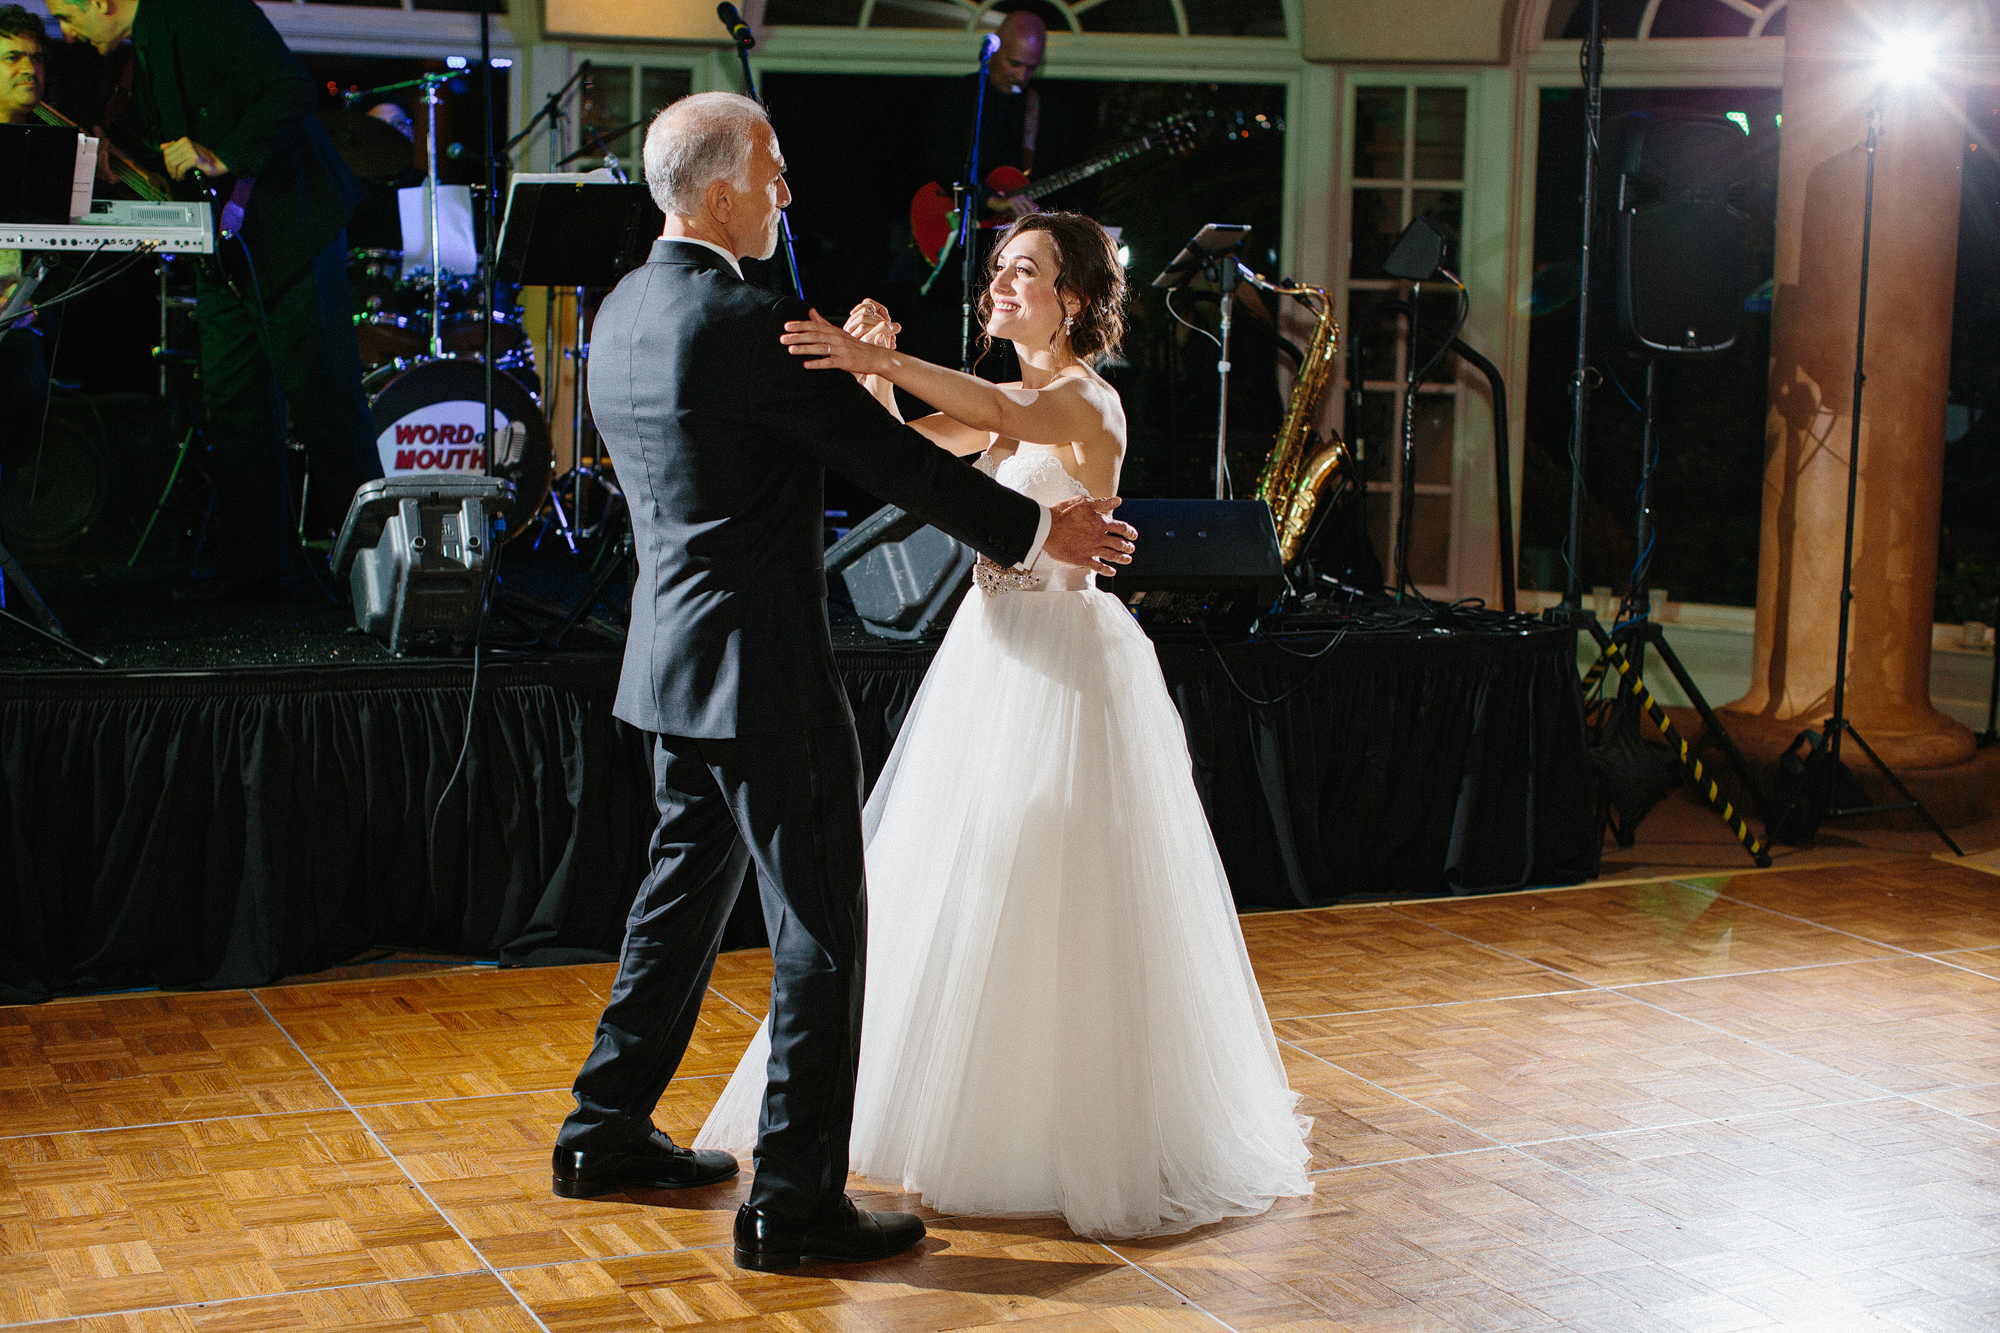 The bride also danced with her dad. 